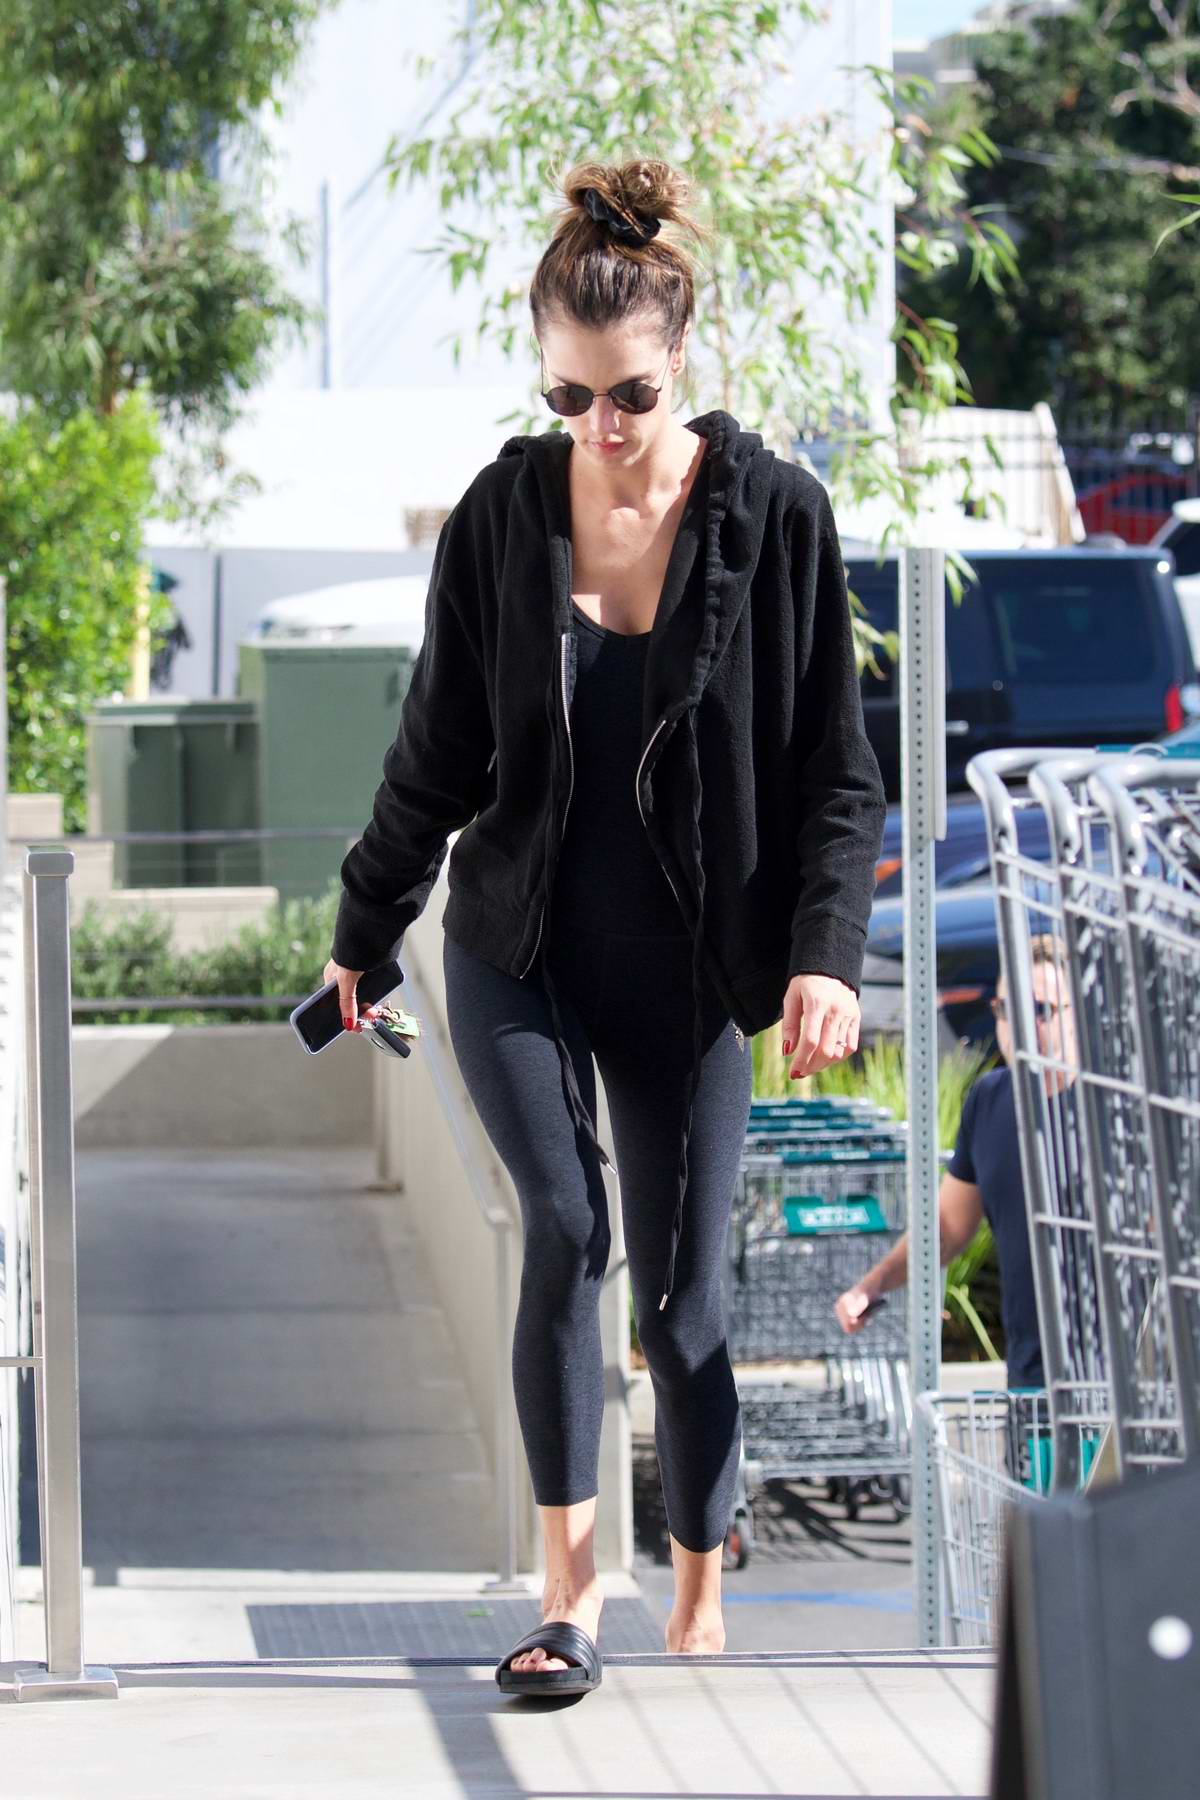 Eiza Gonzalez looks amazing in a black top and olive green leggings during  a coffee run